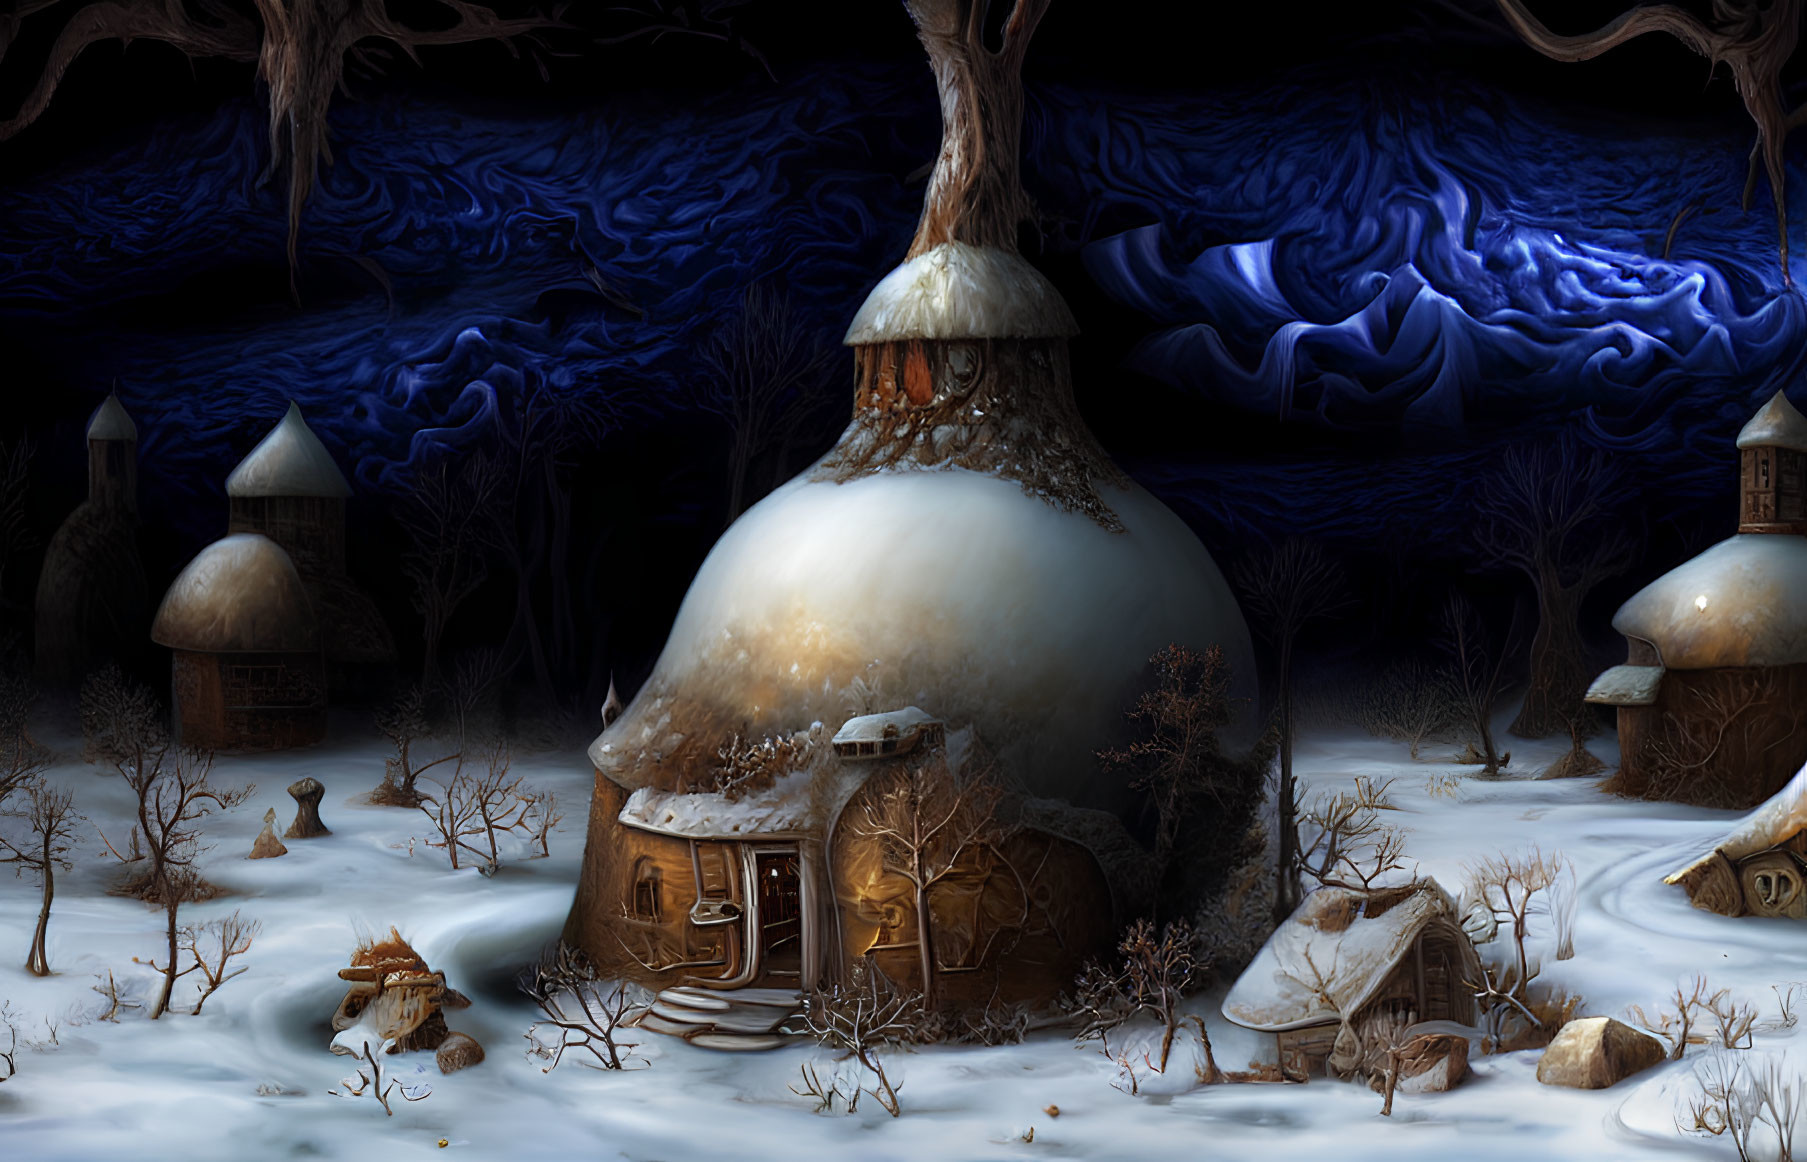 Snow-covered fantasy huts in whimsical winter night scene